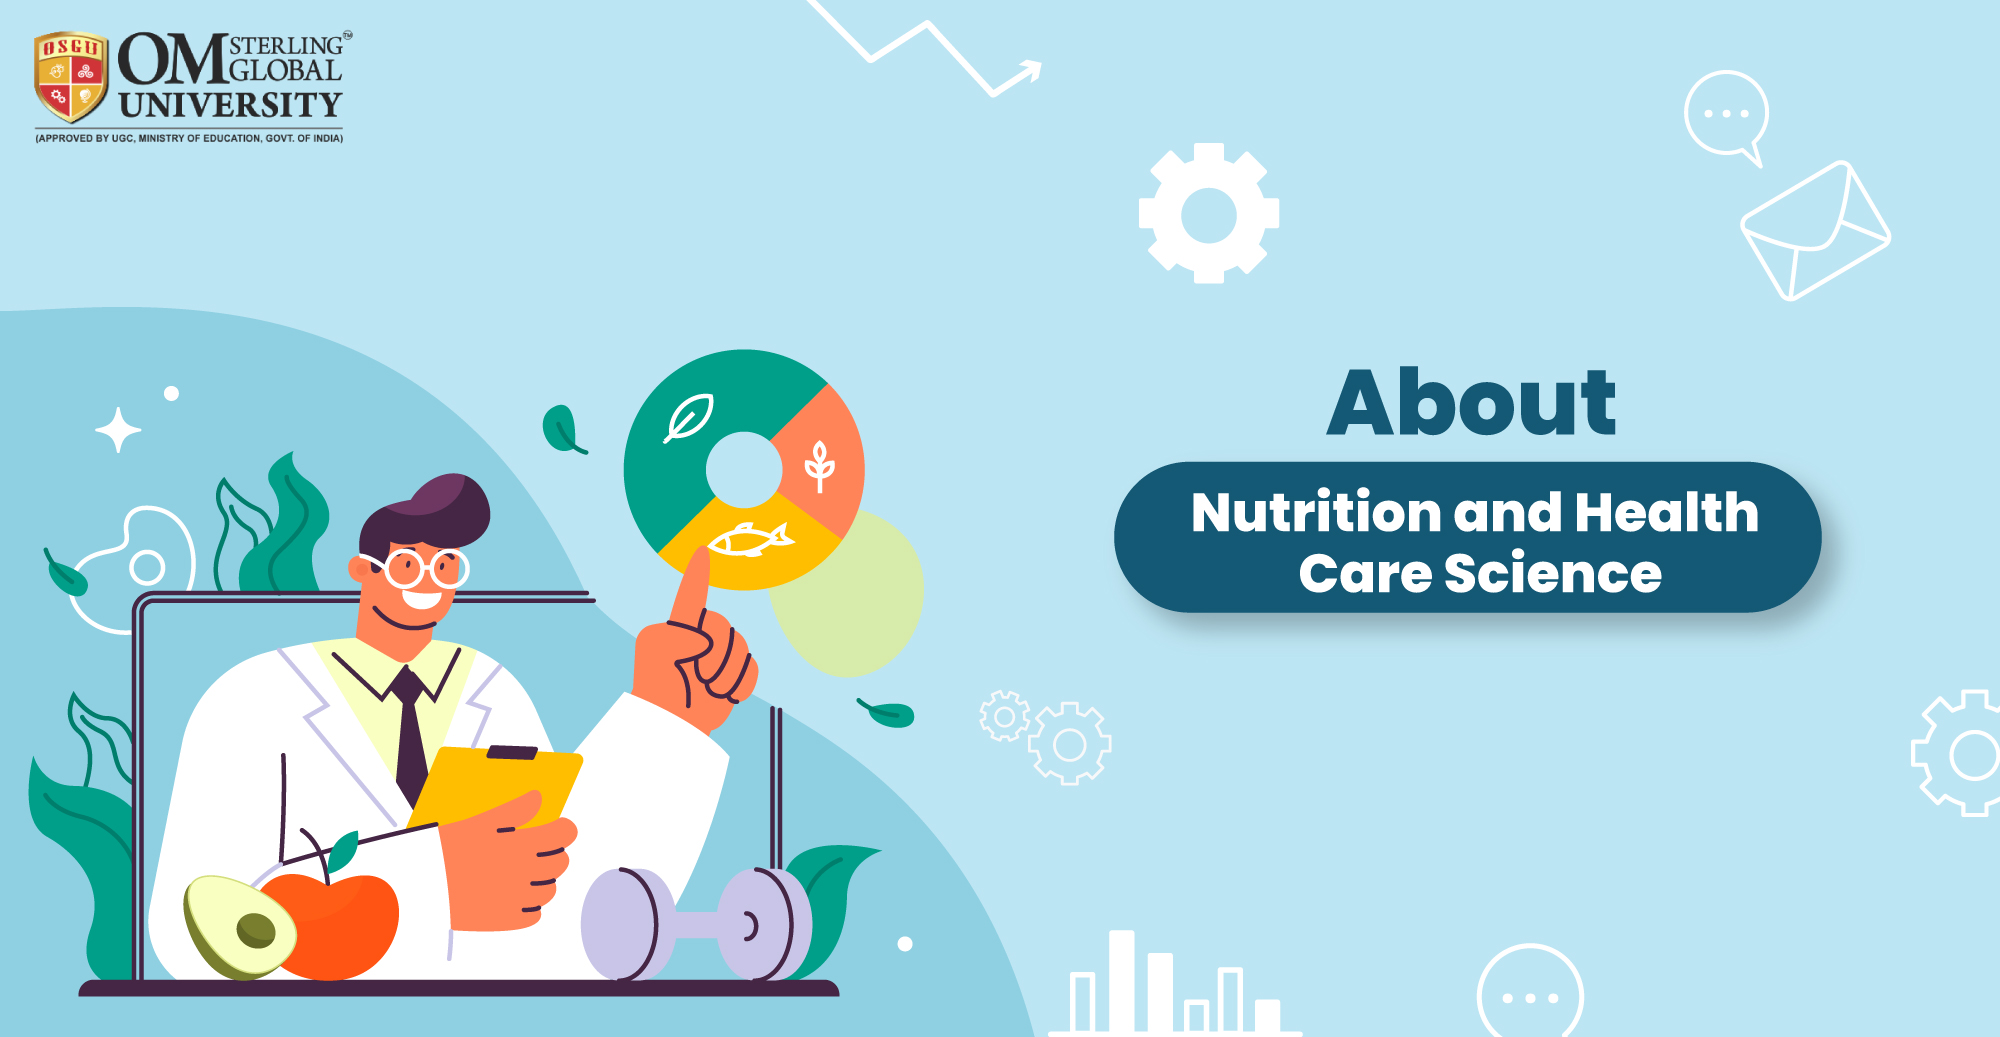 Nutrition and Health Care Science